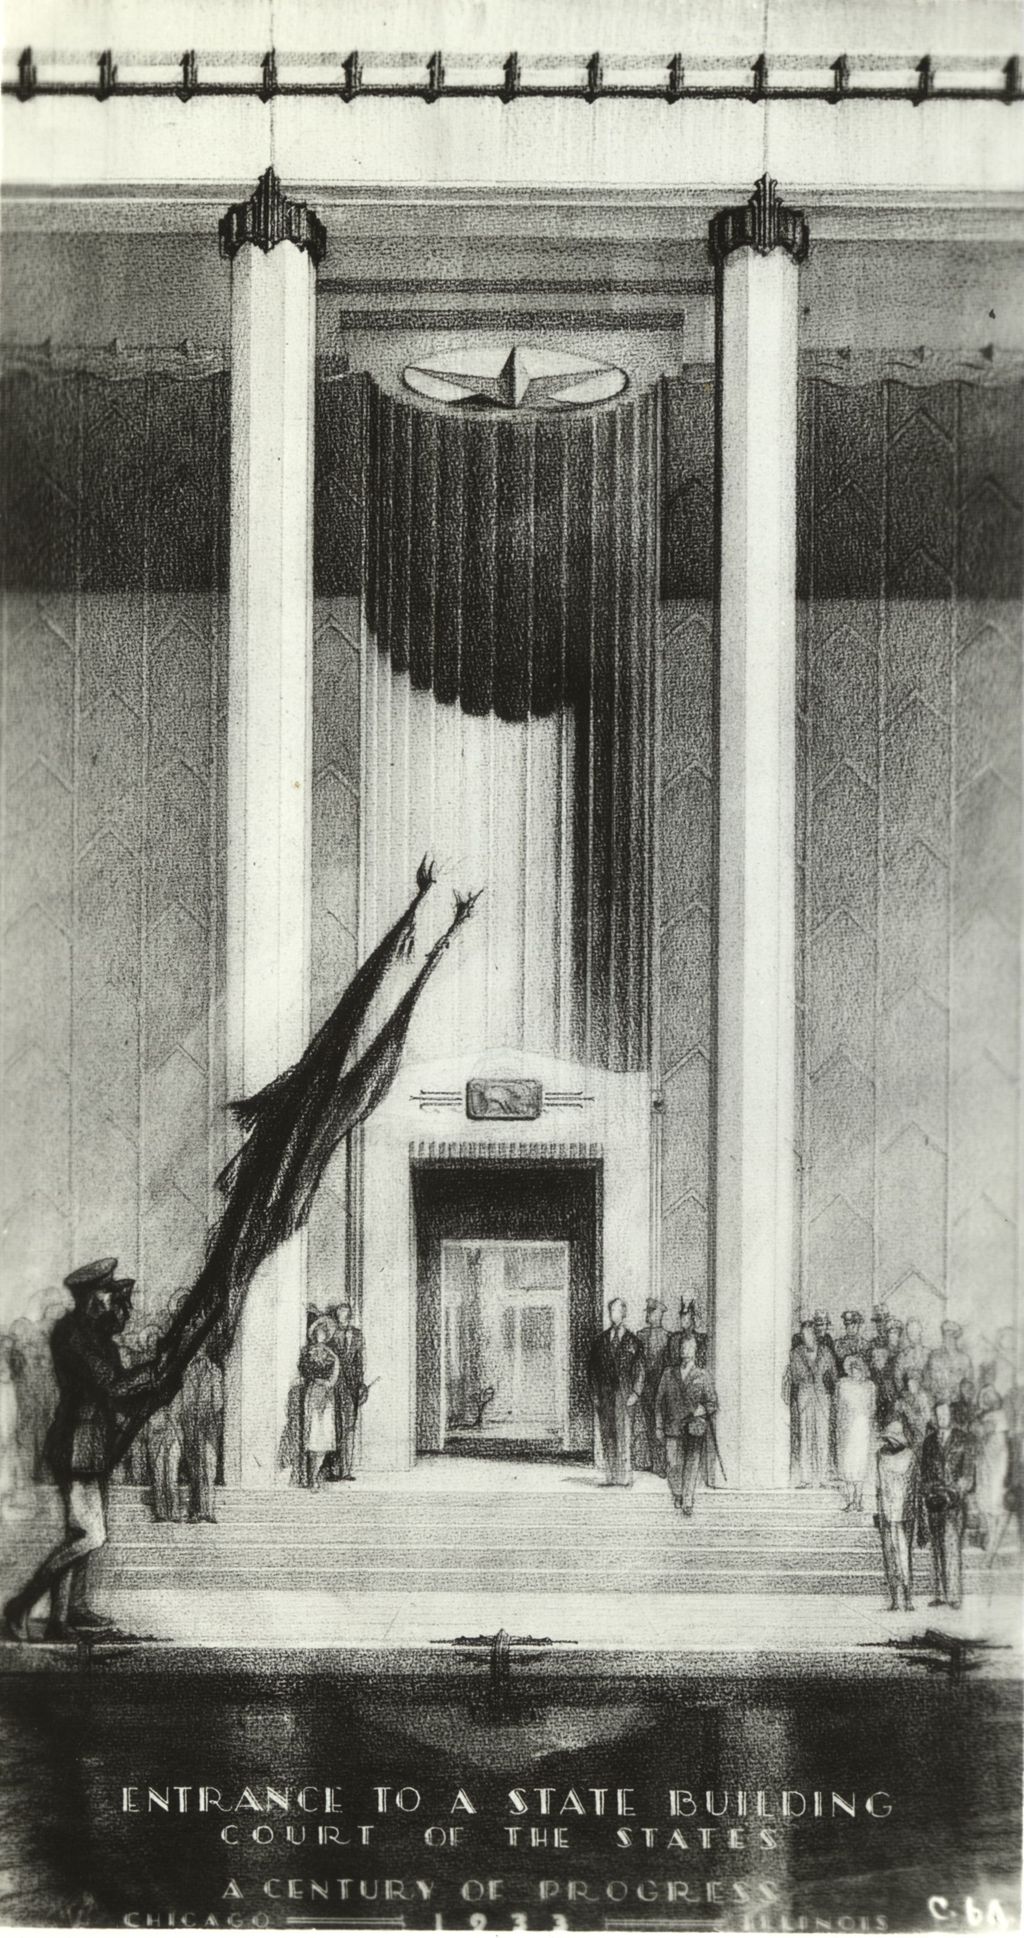 Architect's study of façade of portal in proposed Hall of States at Chicago's 1933 Century of Progress Exposition